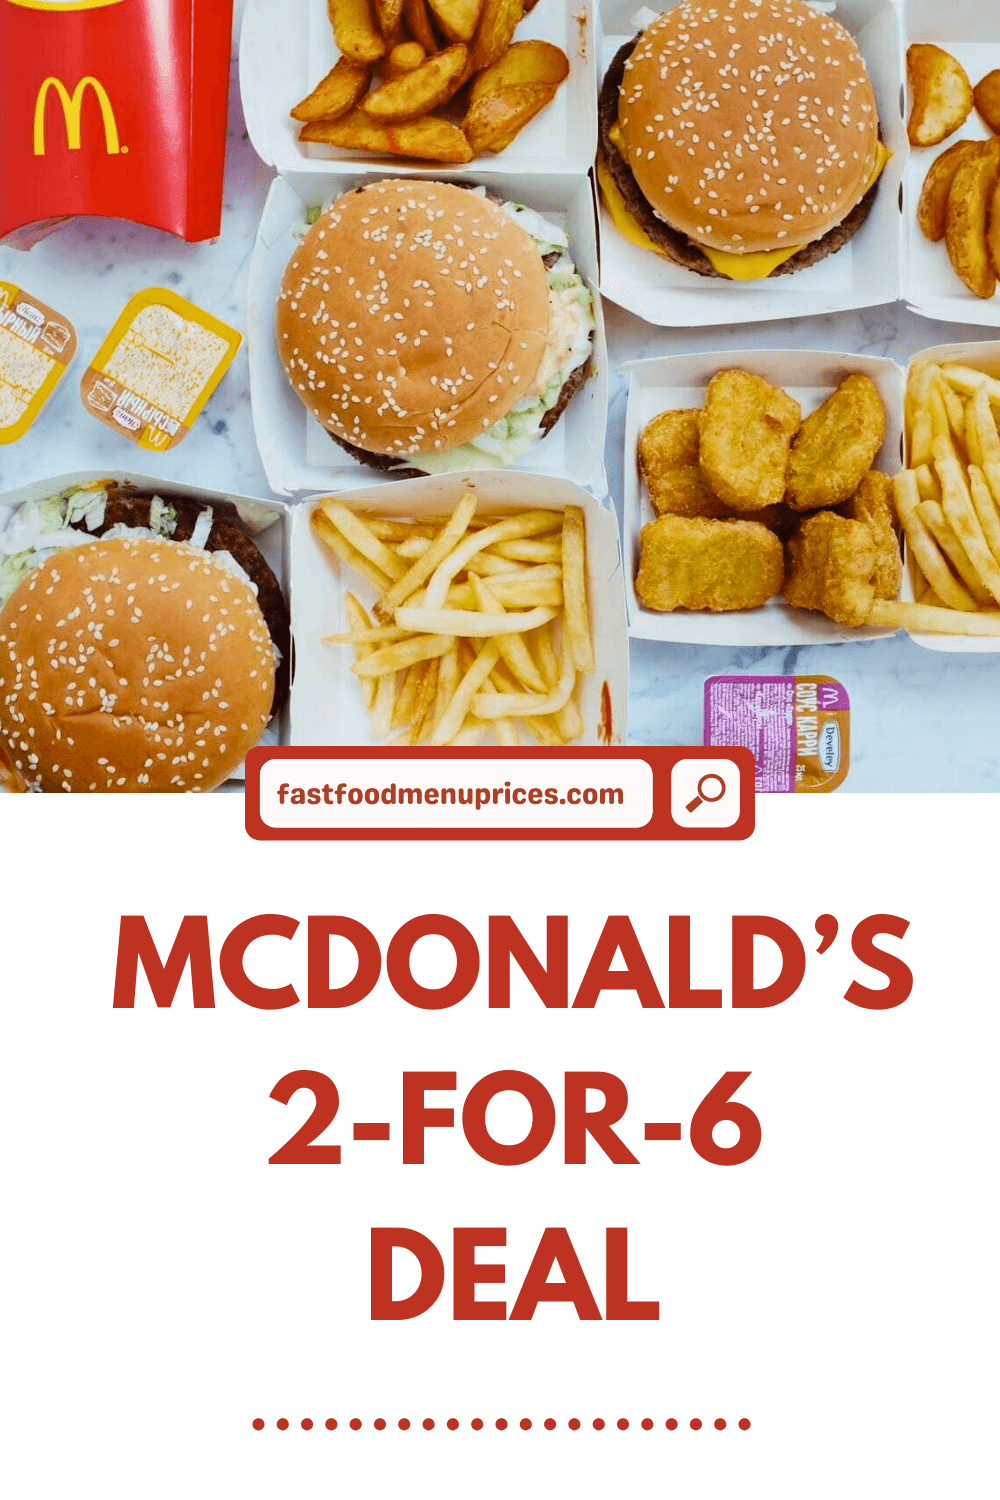 Mcdonald's offering a tempting 2 for 6 deal.